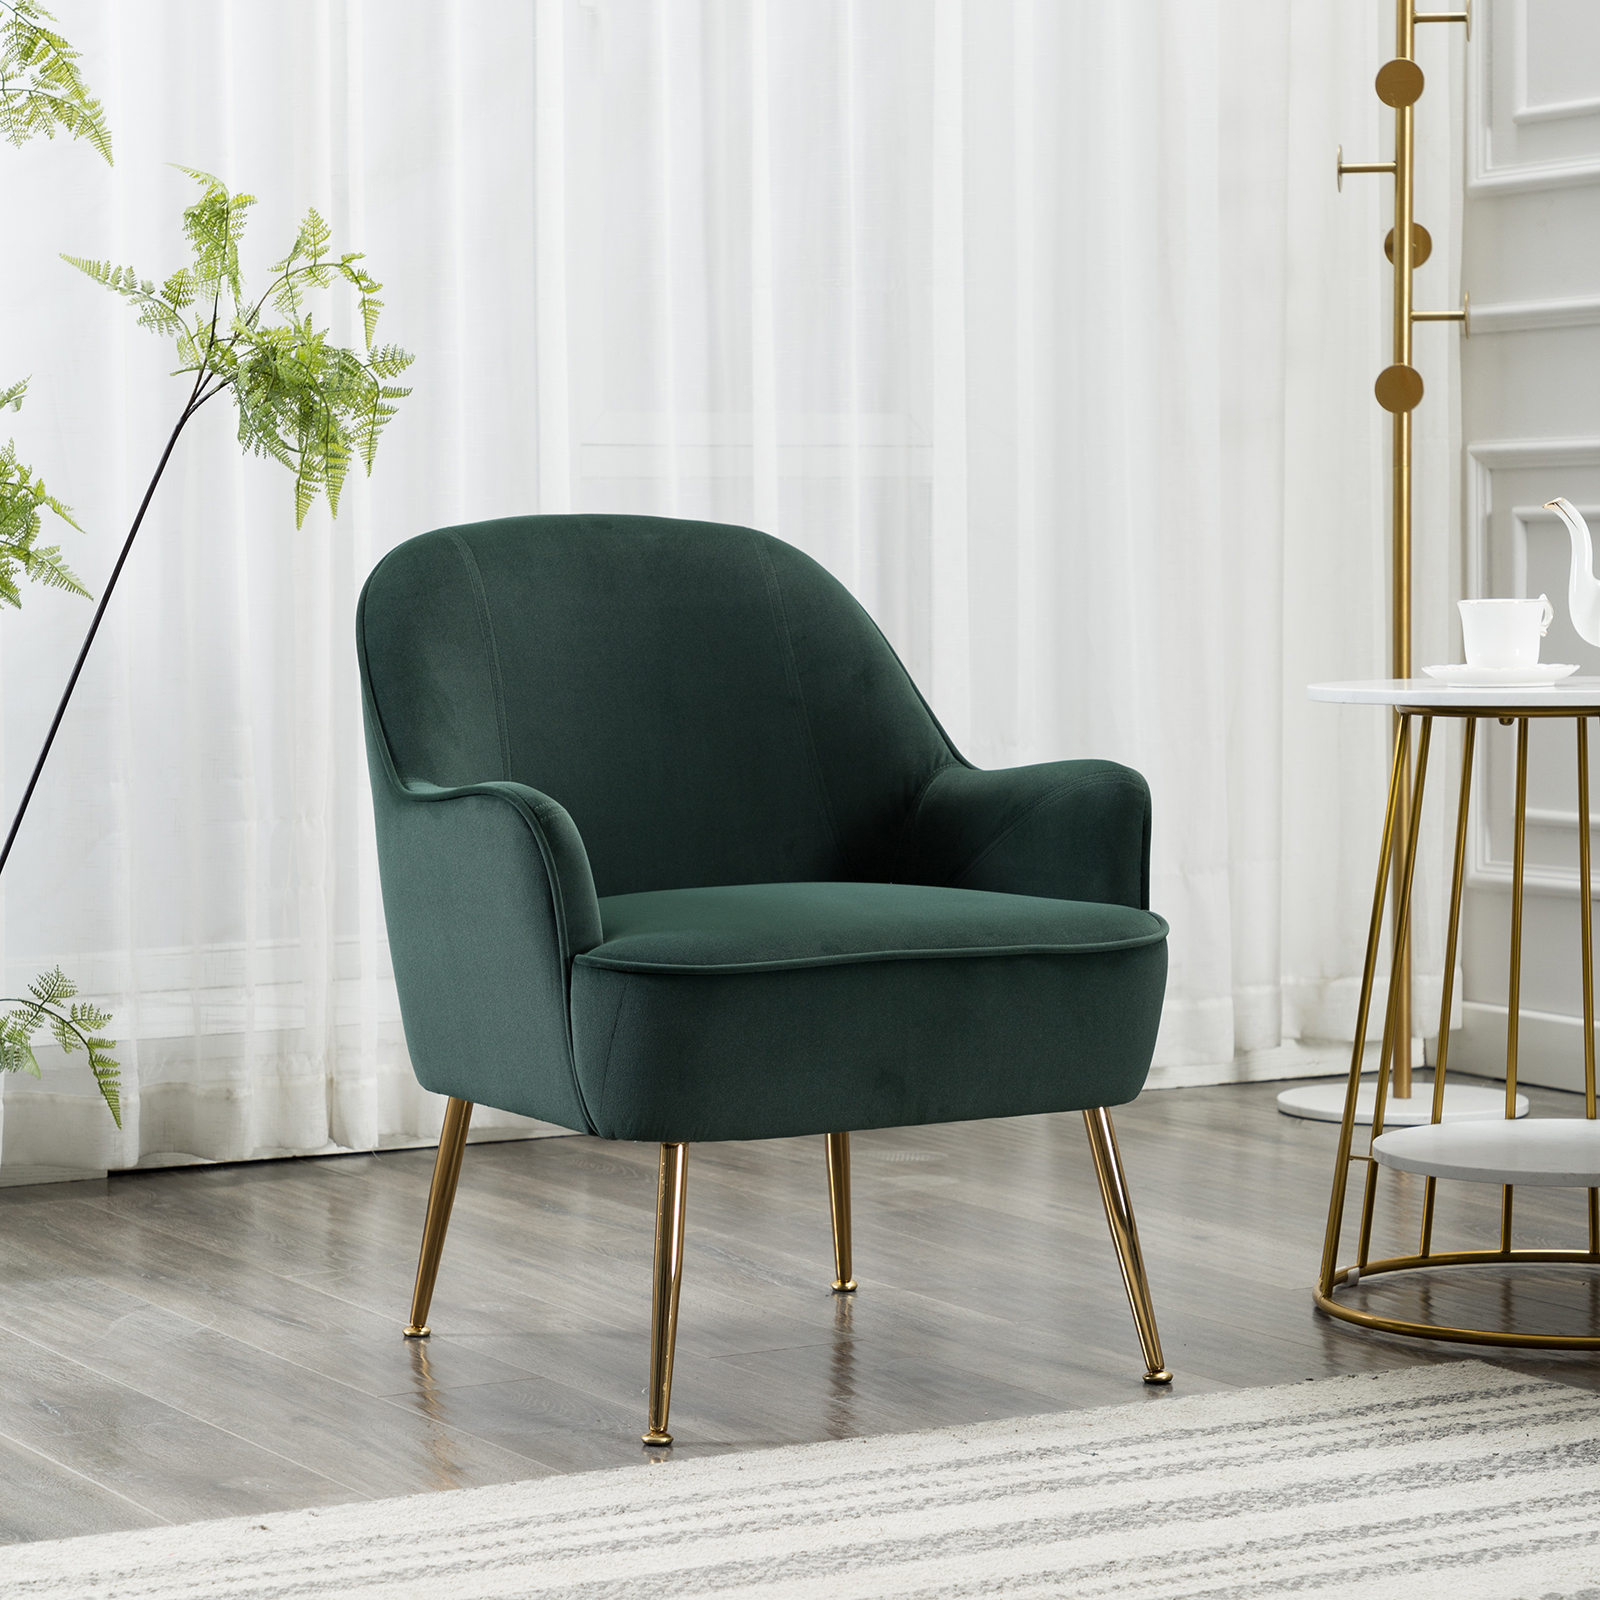 Modern Soft Velvet Material Dark Green Ergonomics Accent Chair Living Room Chair Bedroom Chair Home Chair With Gold Legs And Adjustable Legs For Indoor Home-Boyel Living